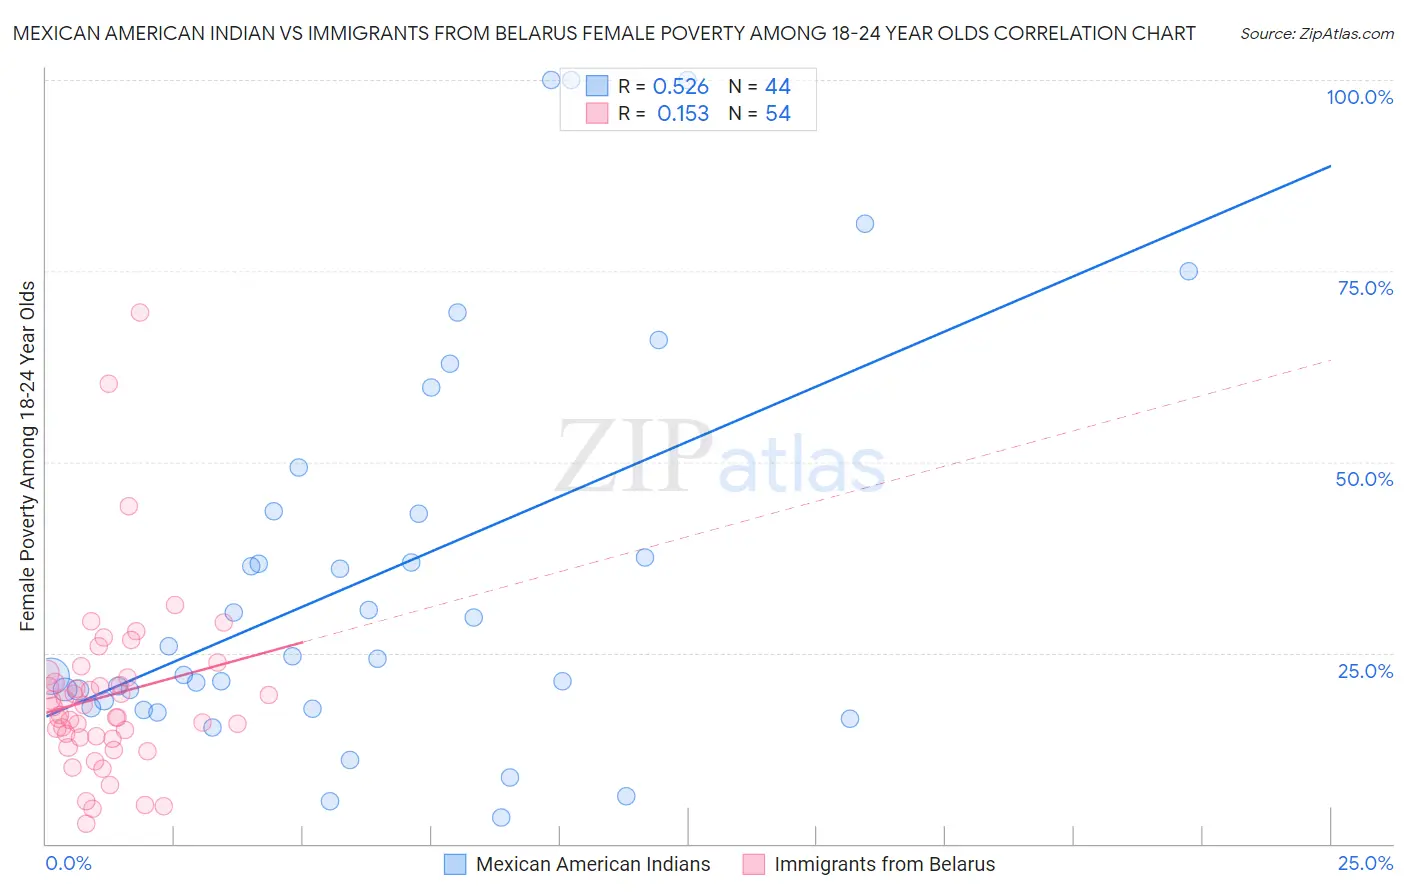 Mexican American Indian vs Immigrants from Belarus Female Poverty Among 18-24 Year Olds